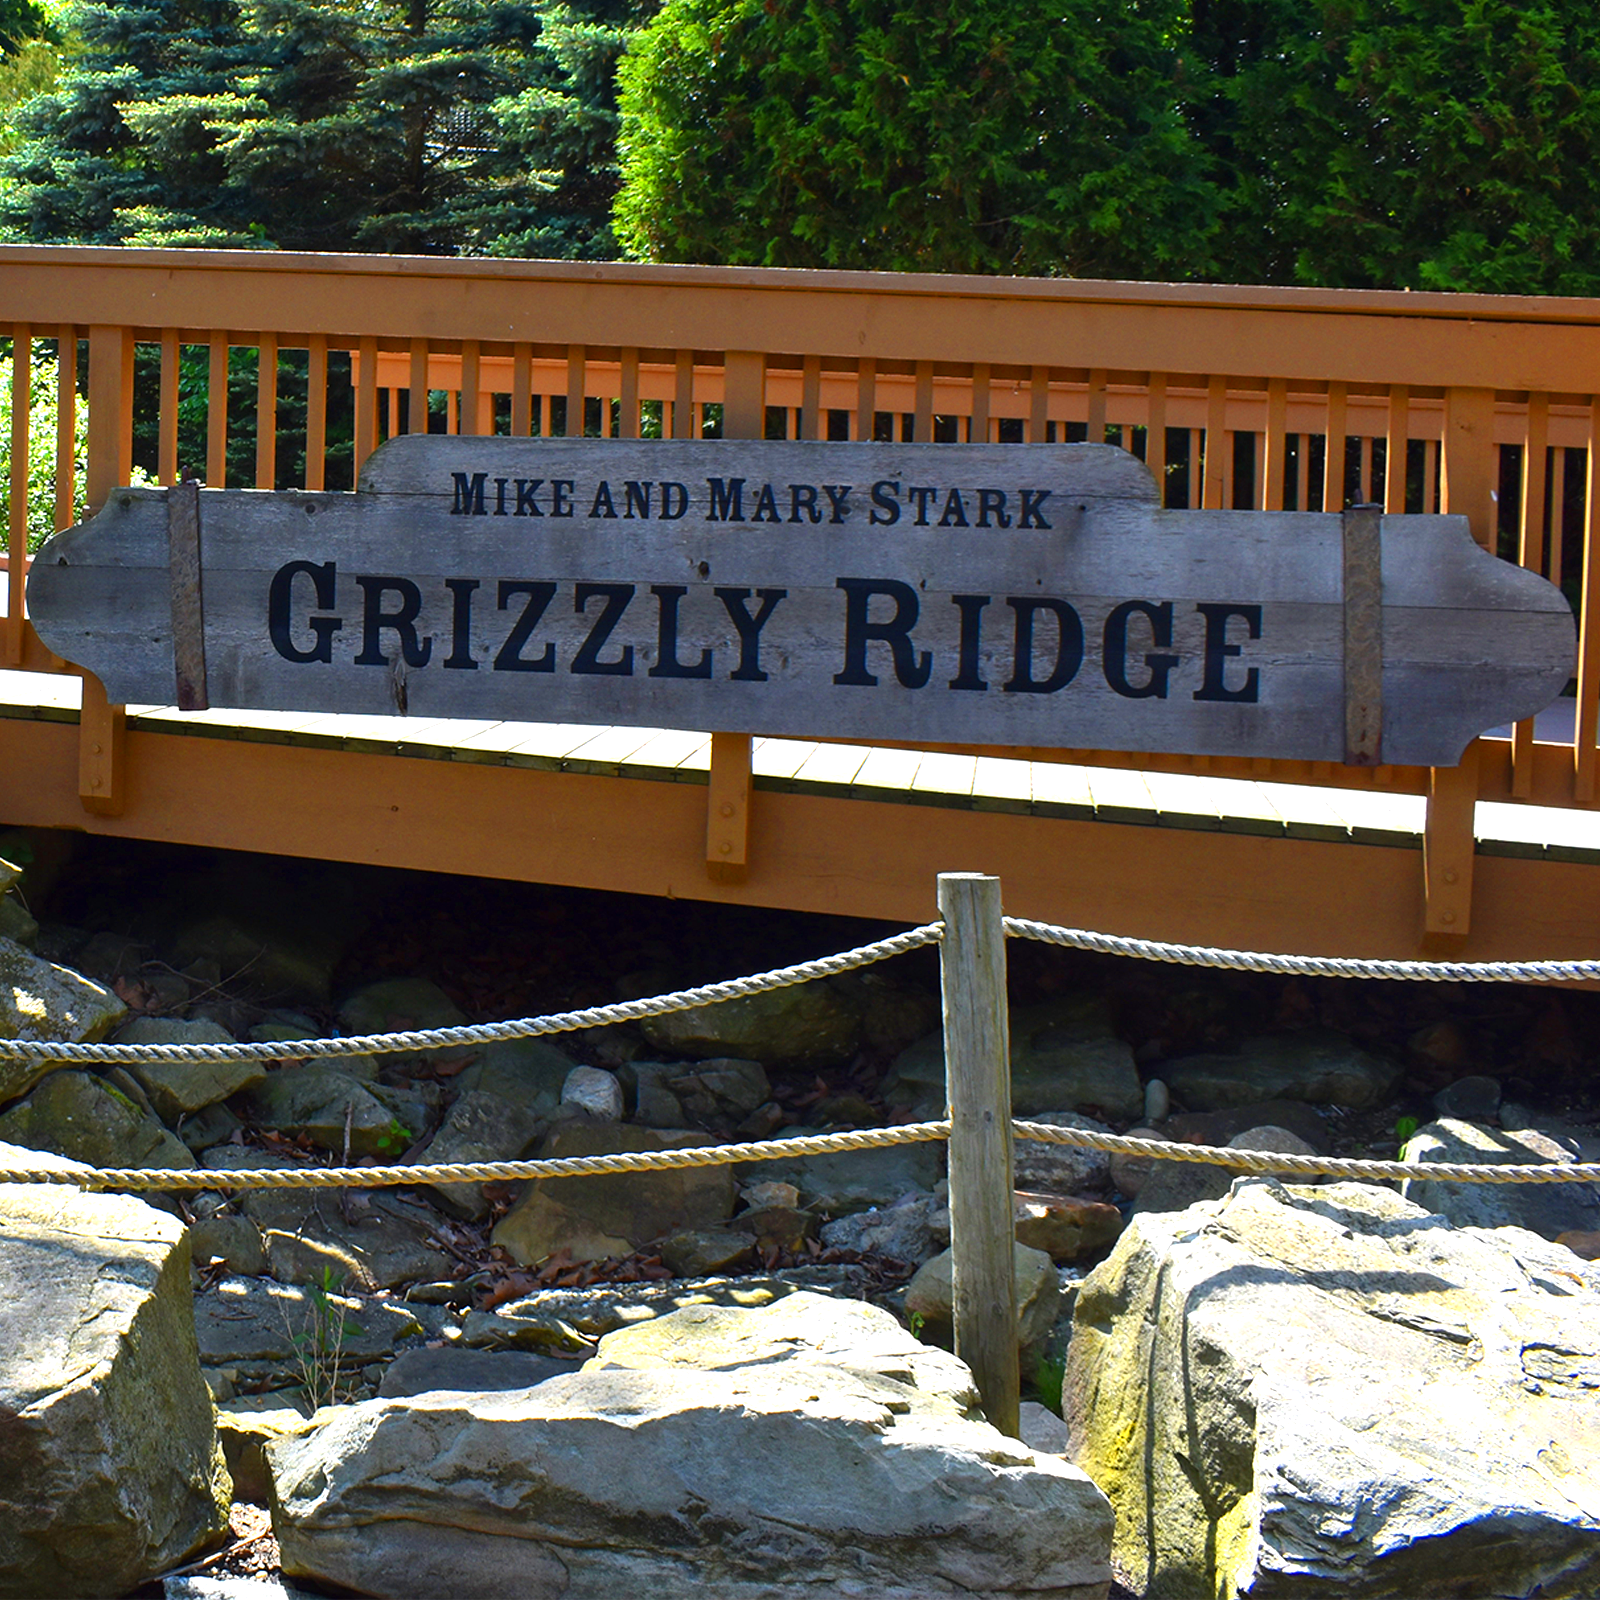 The Grizzly Ridge in Akron Zoo